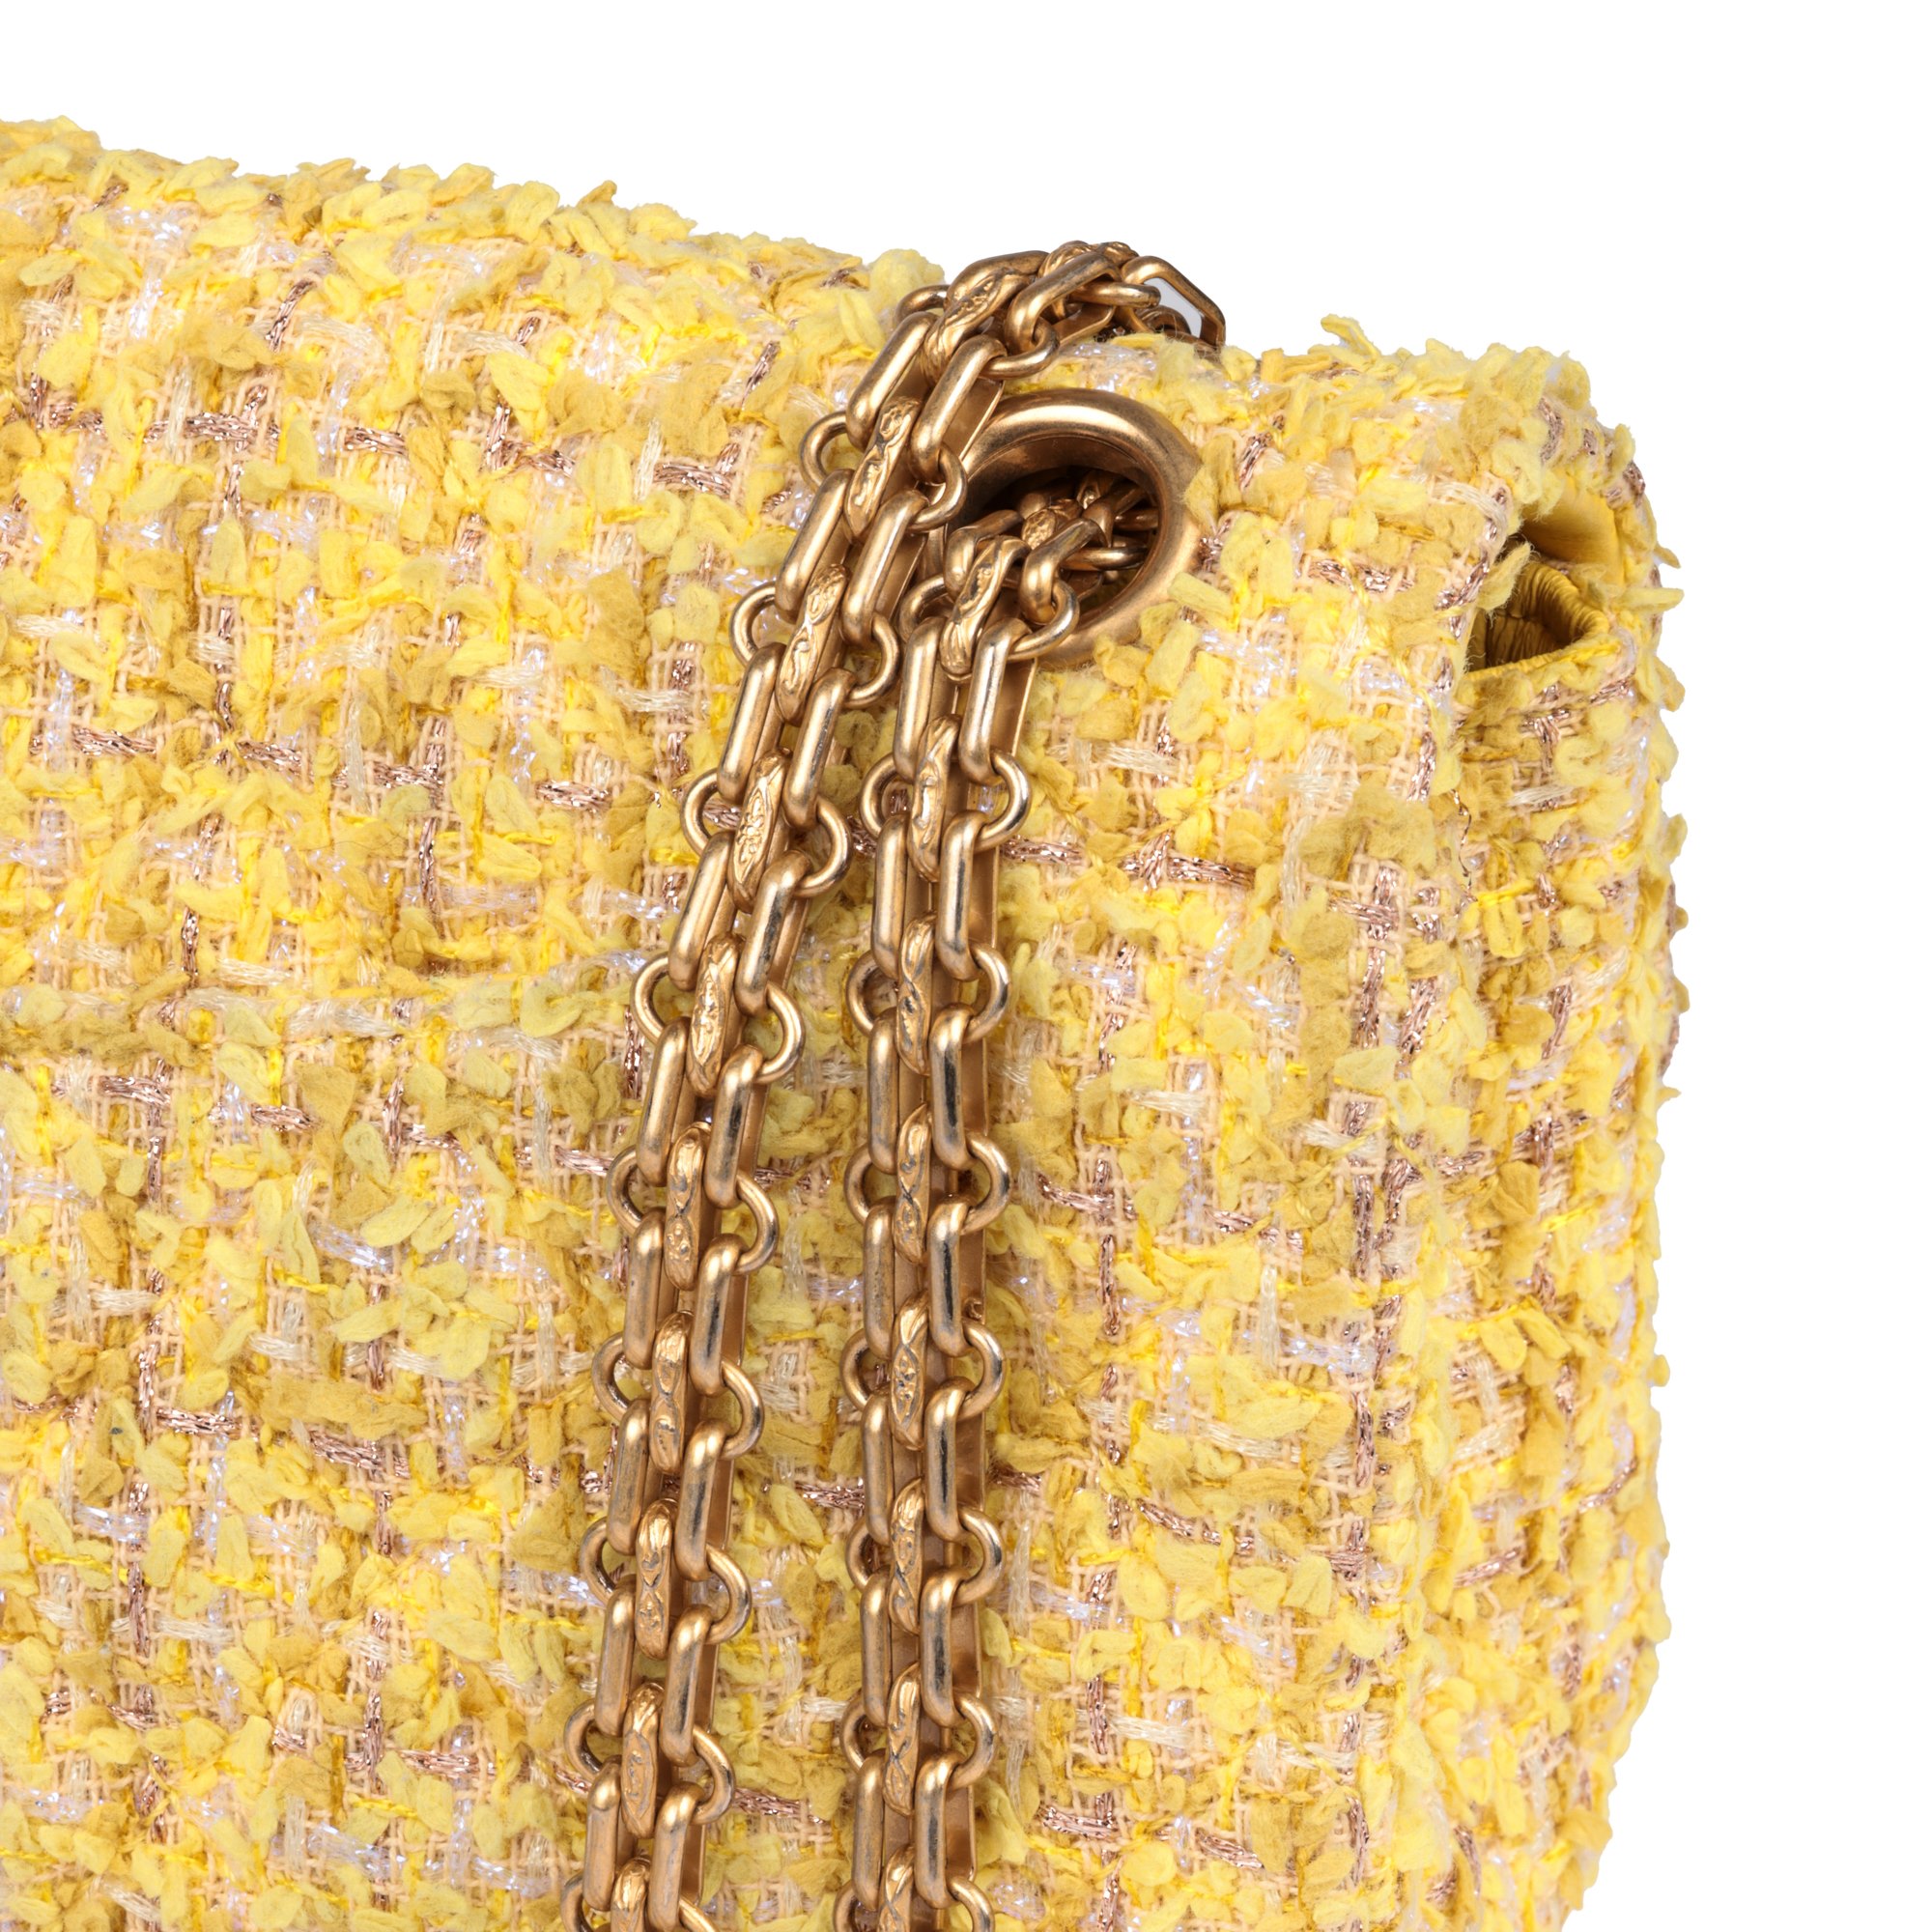 Chanel Canary Yellow Tweed Fabric 224 2.55 Reissue Double Flap Bag